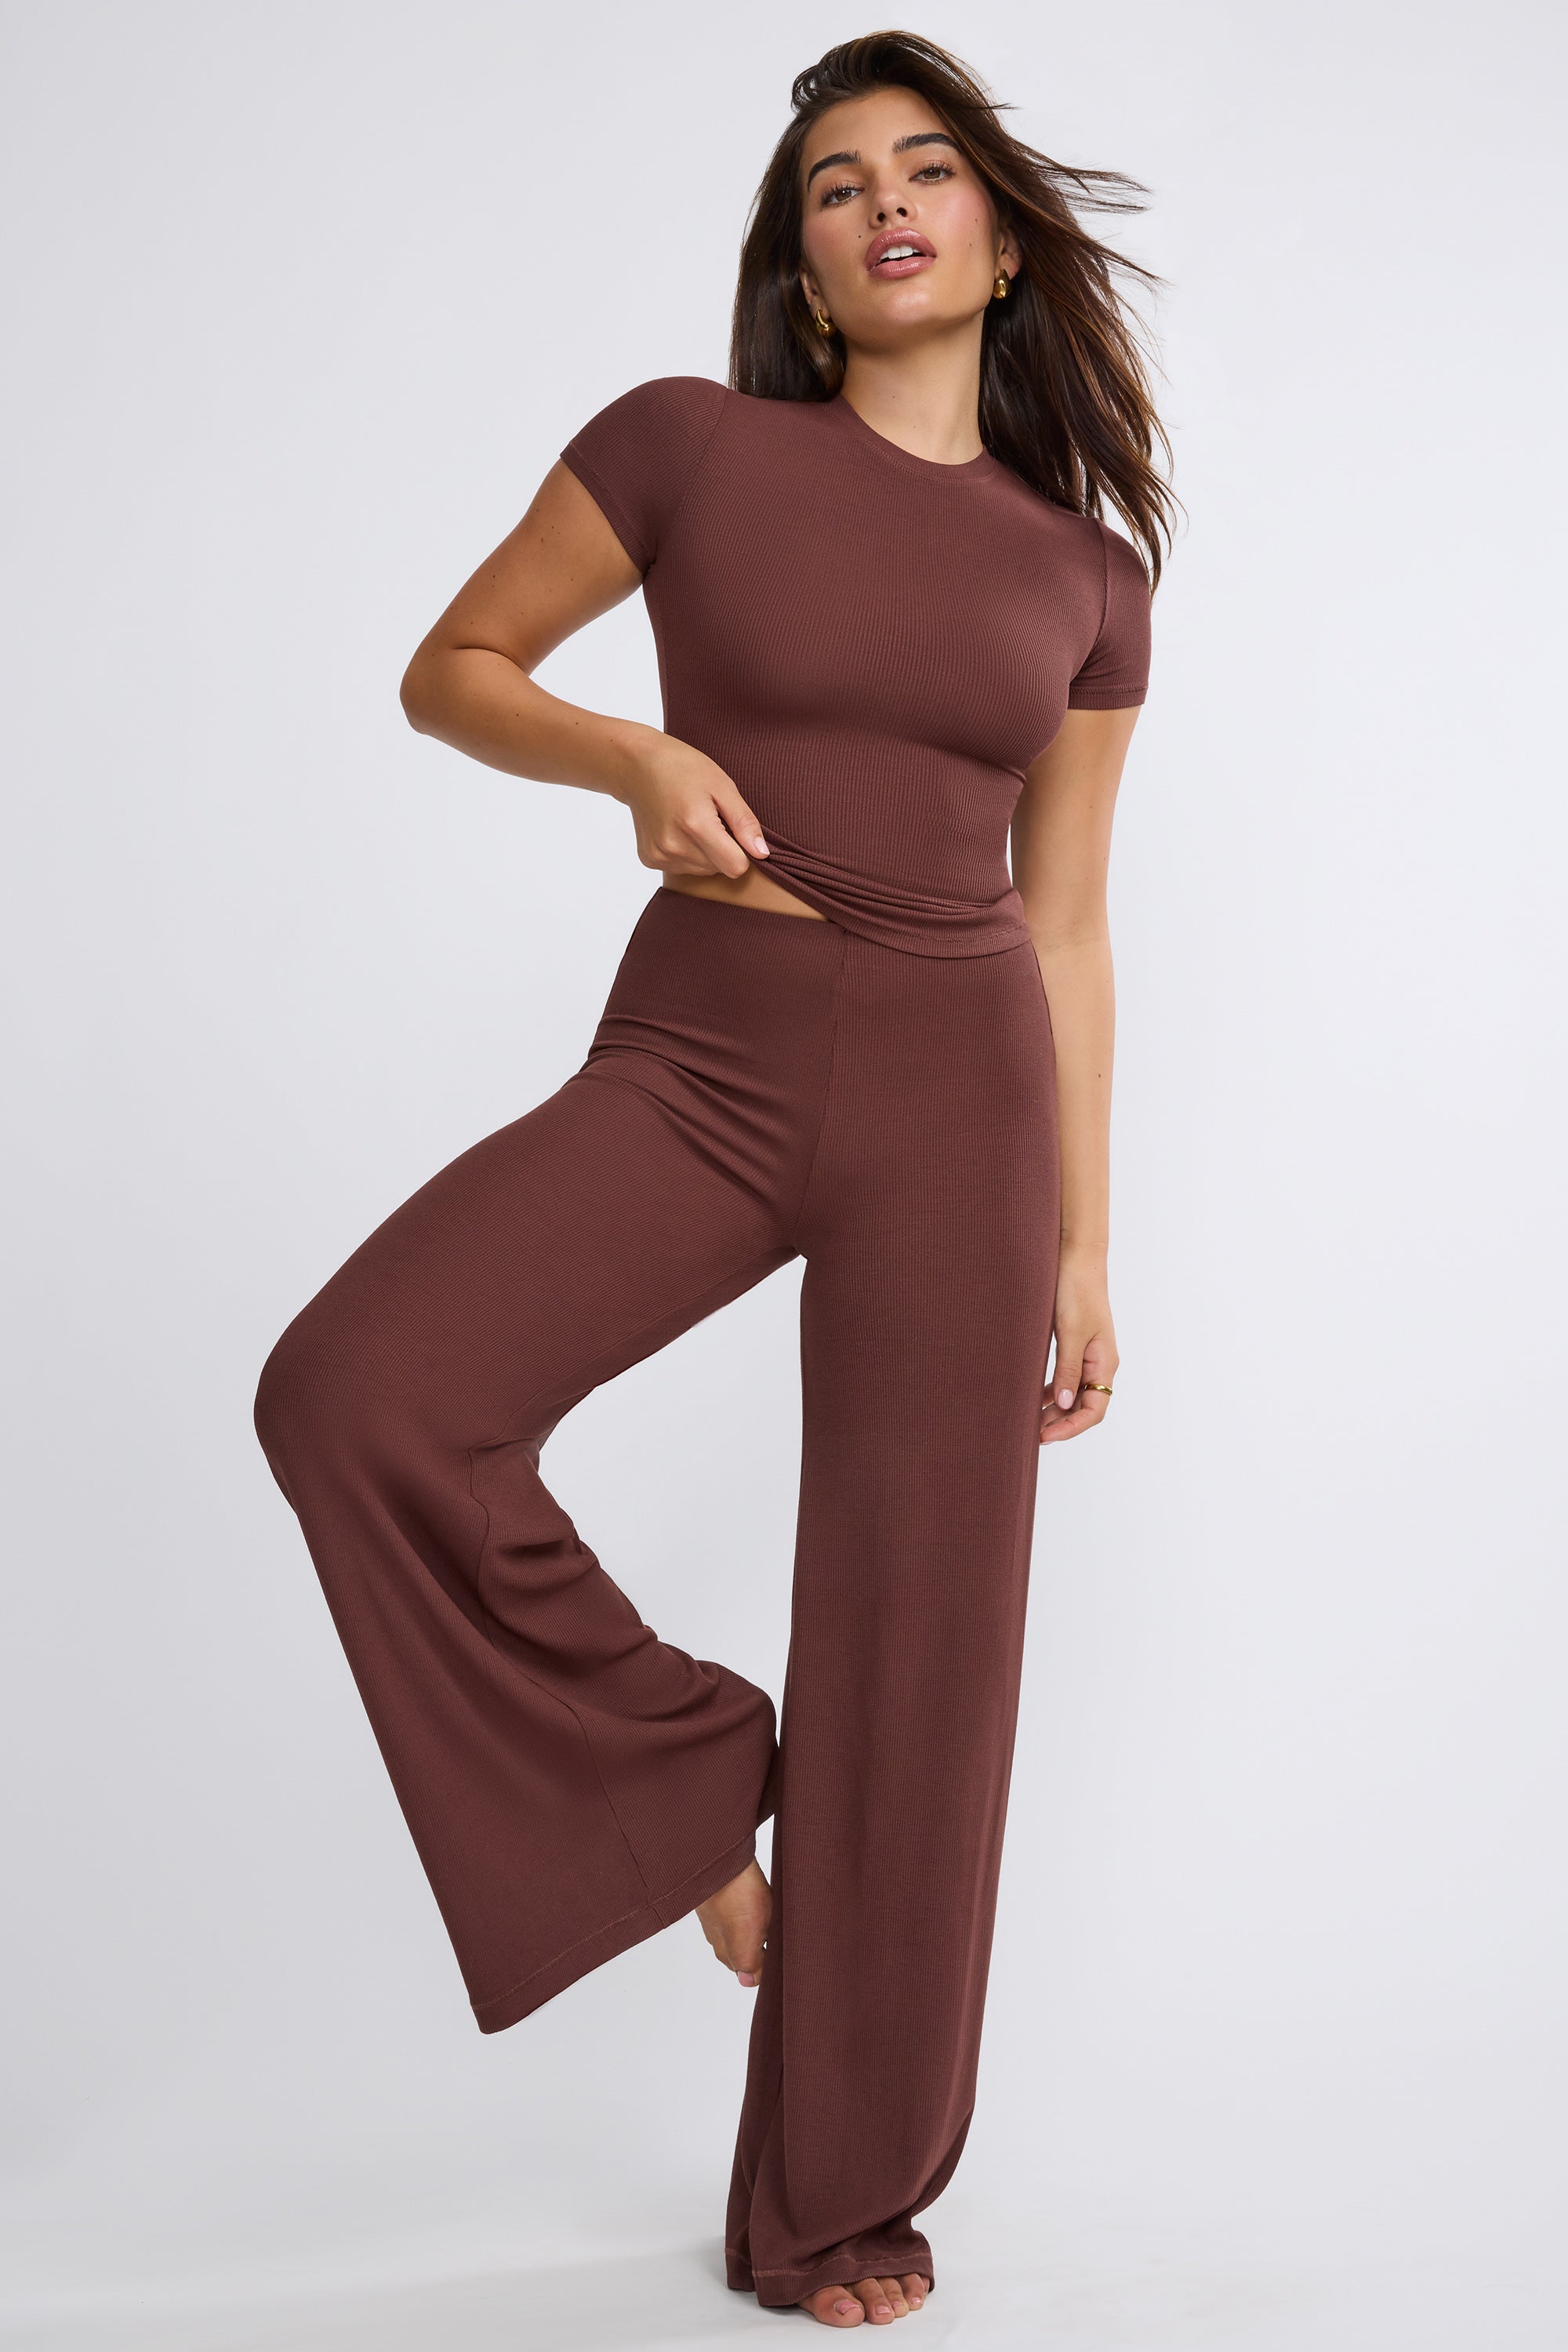 Shop The Scallop High Waisted Trousers in Very Dark Brown At Nolabels -  Nolabels.in